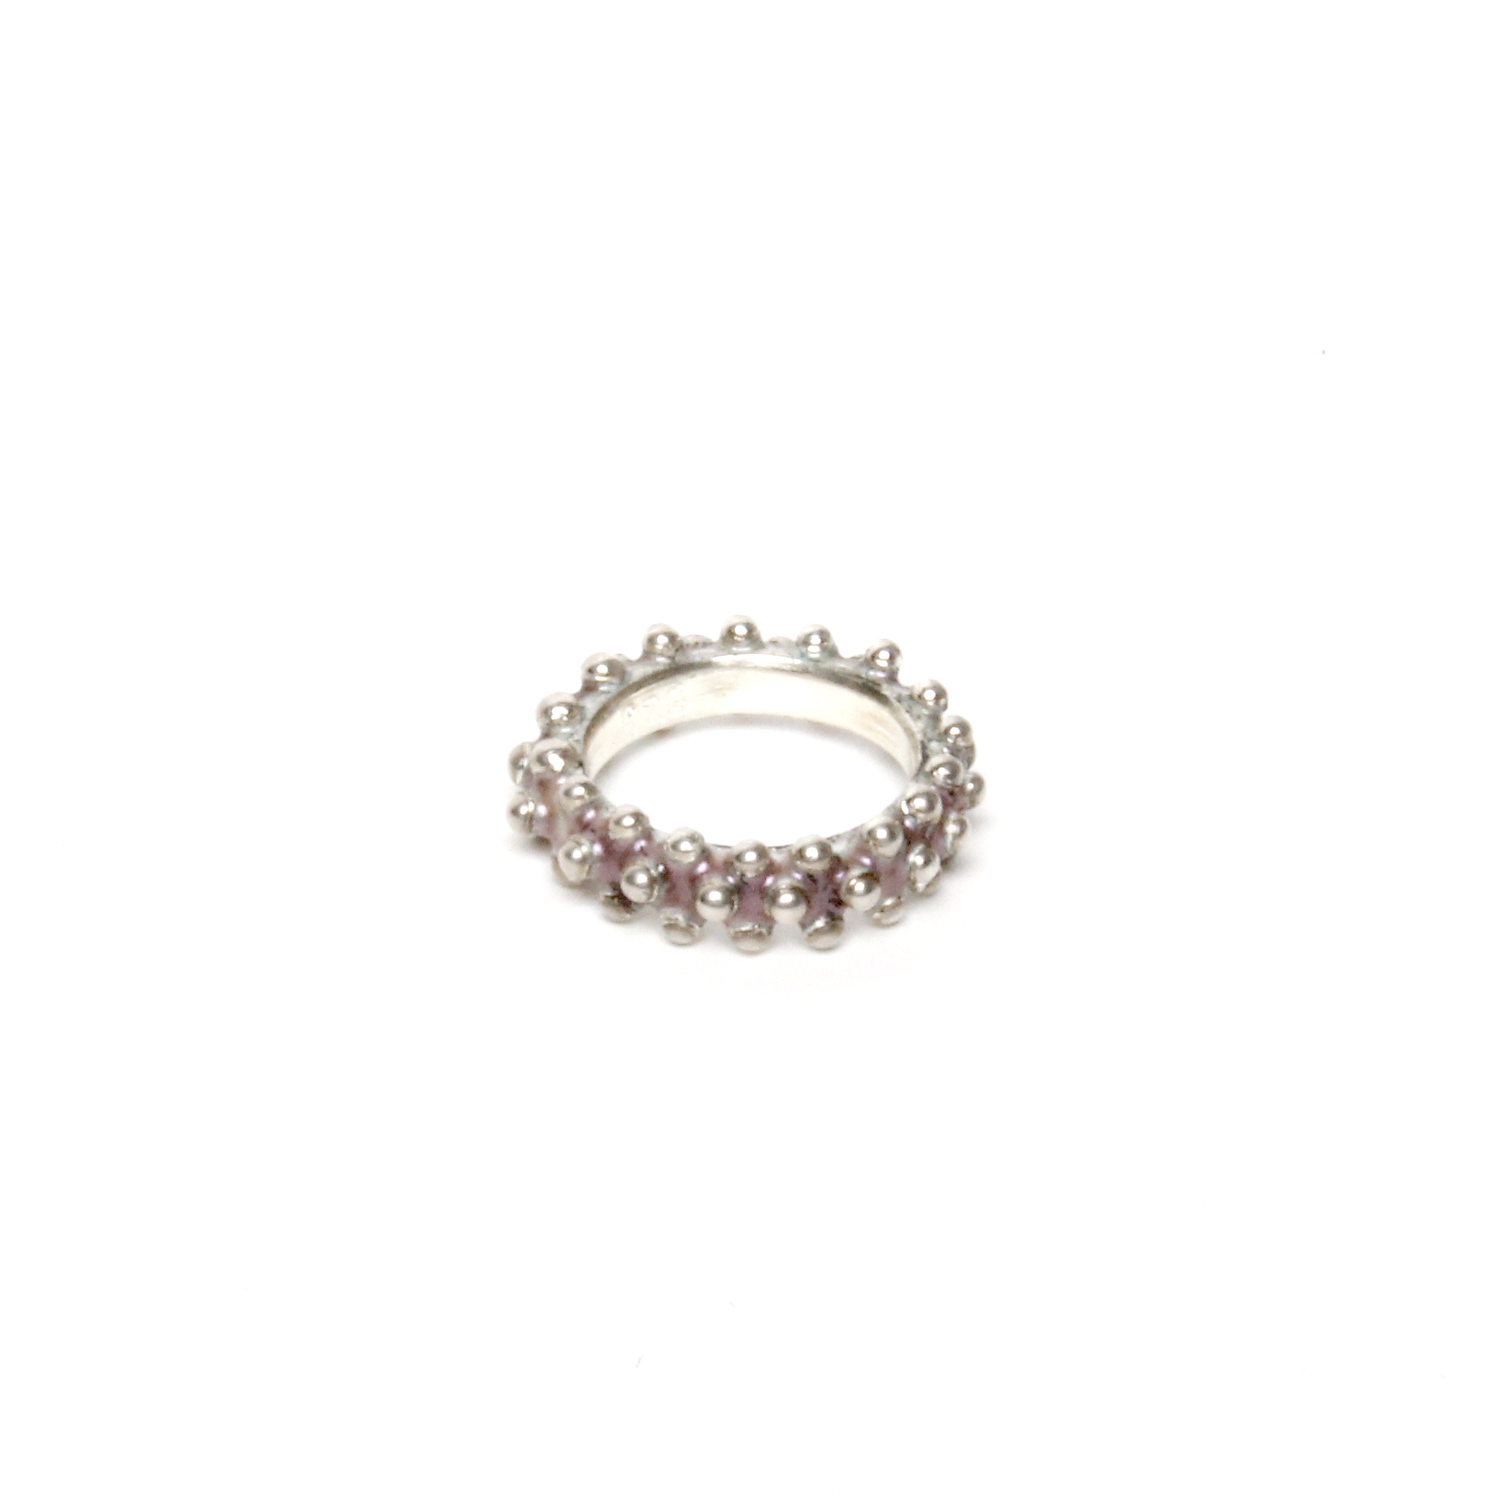 Cinelli Maillet: Blowfish Eternity Ring in Rose Purple Product Image 1 of 3